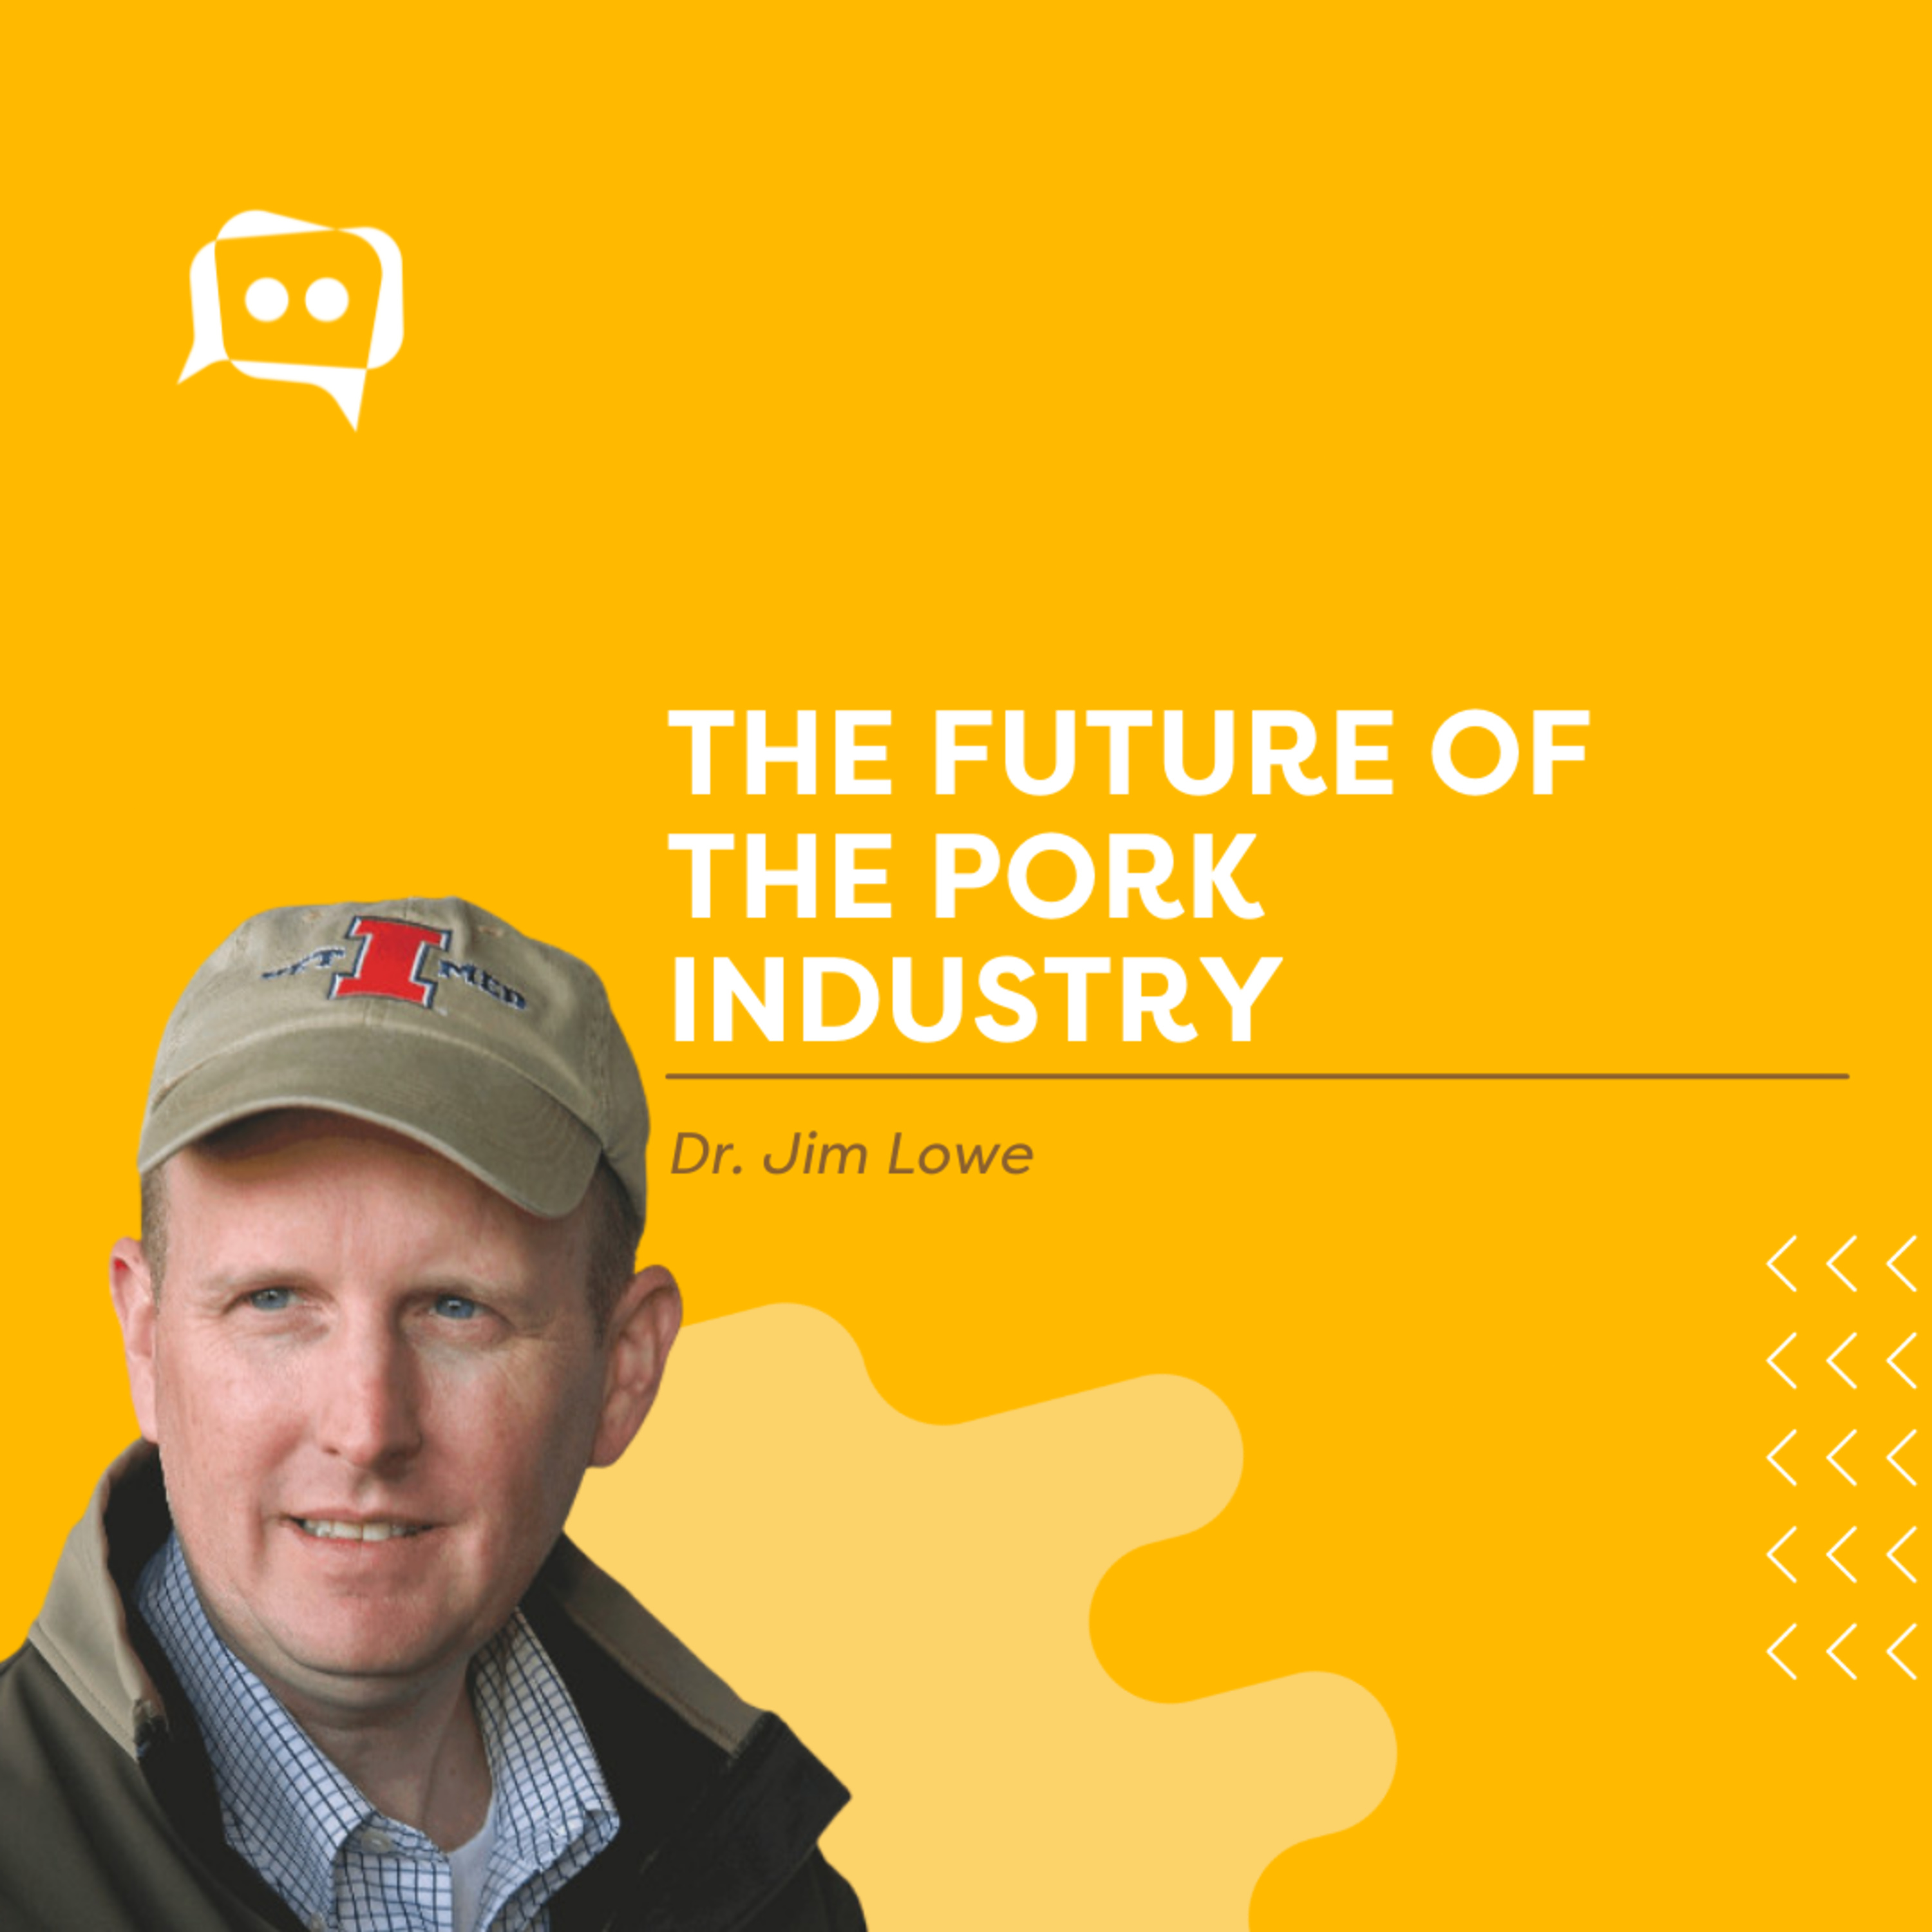 #SHORTS: The future of the pork industry, with Dr. Jim Lowe